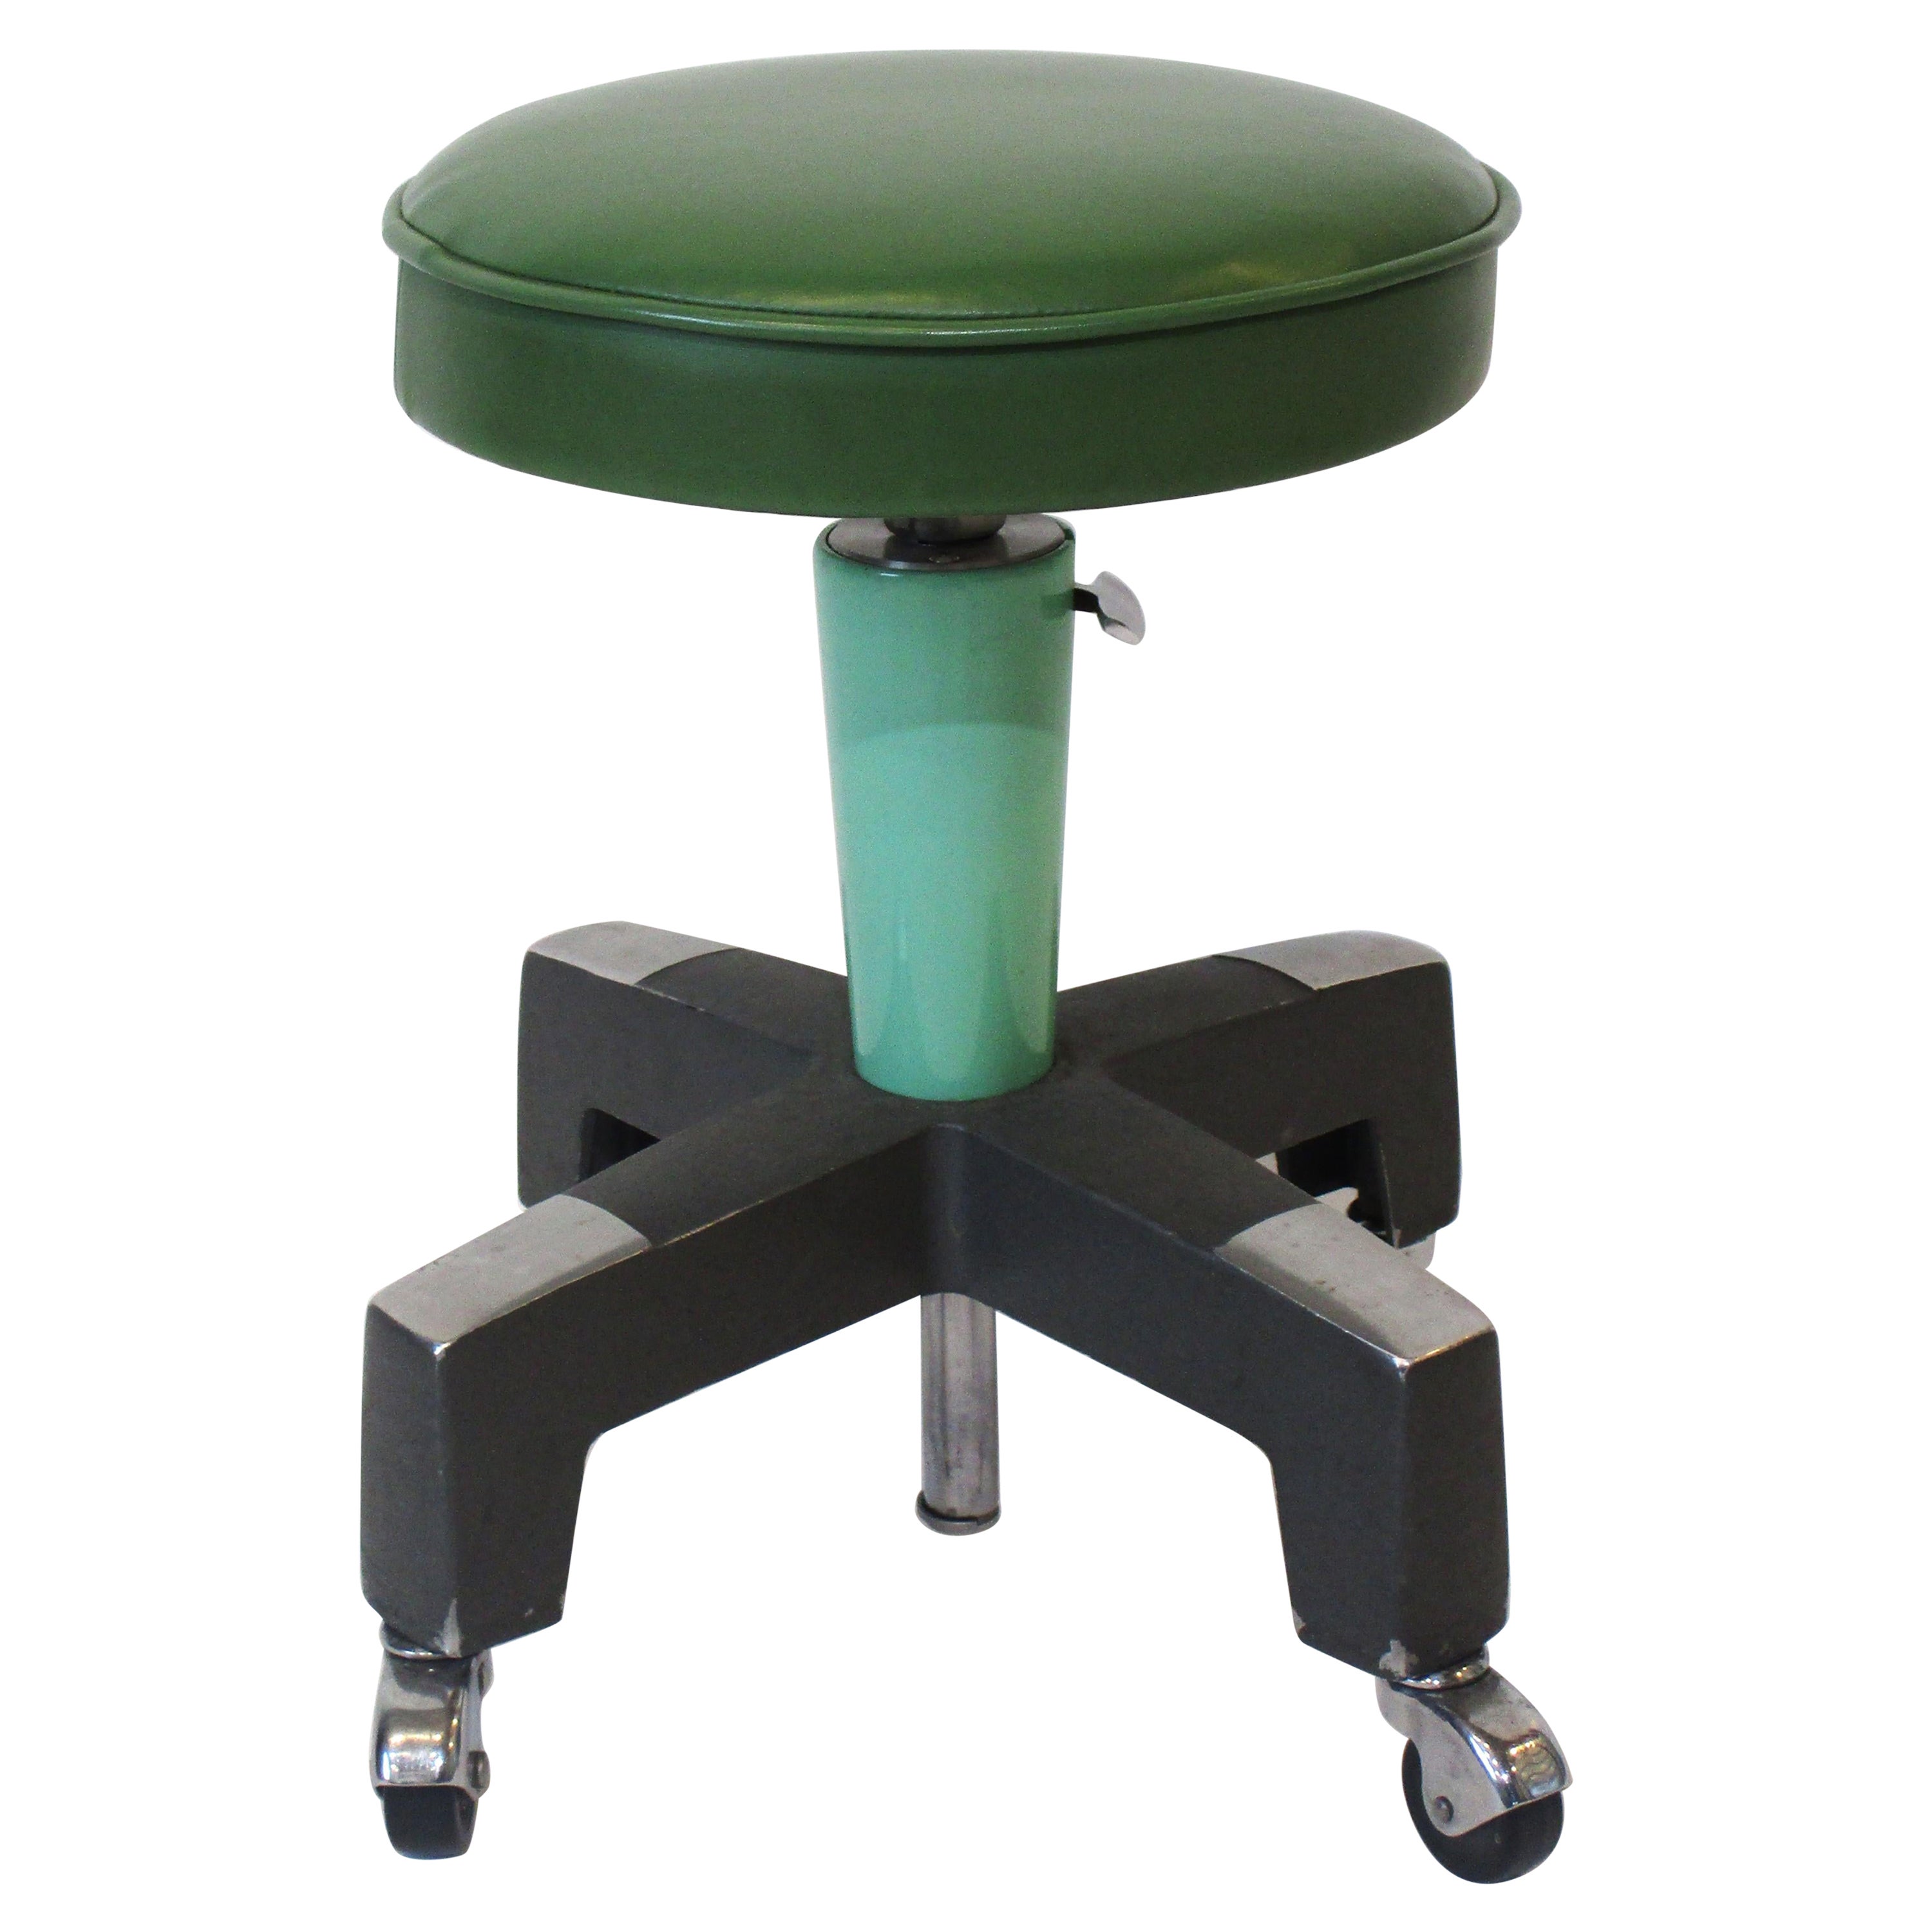 Machine Age Art Deco Adjustable Stool in the Style of Wolfgang Hoffmann, Webber